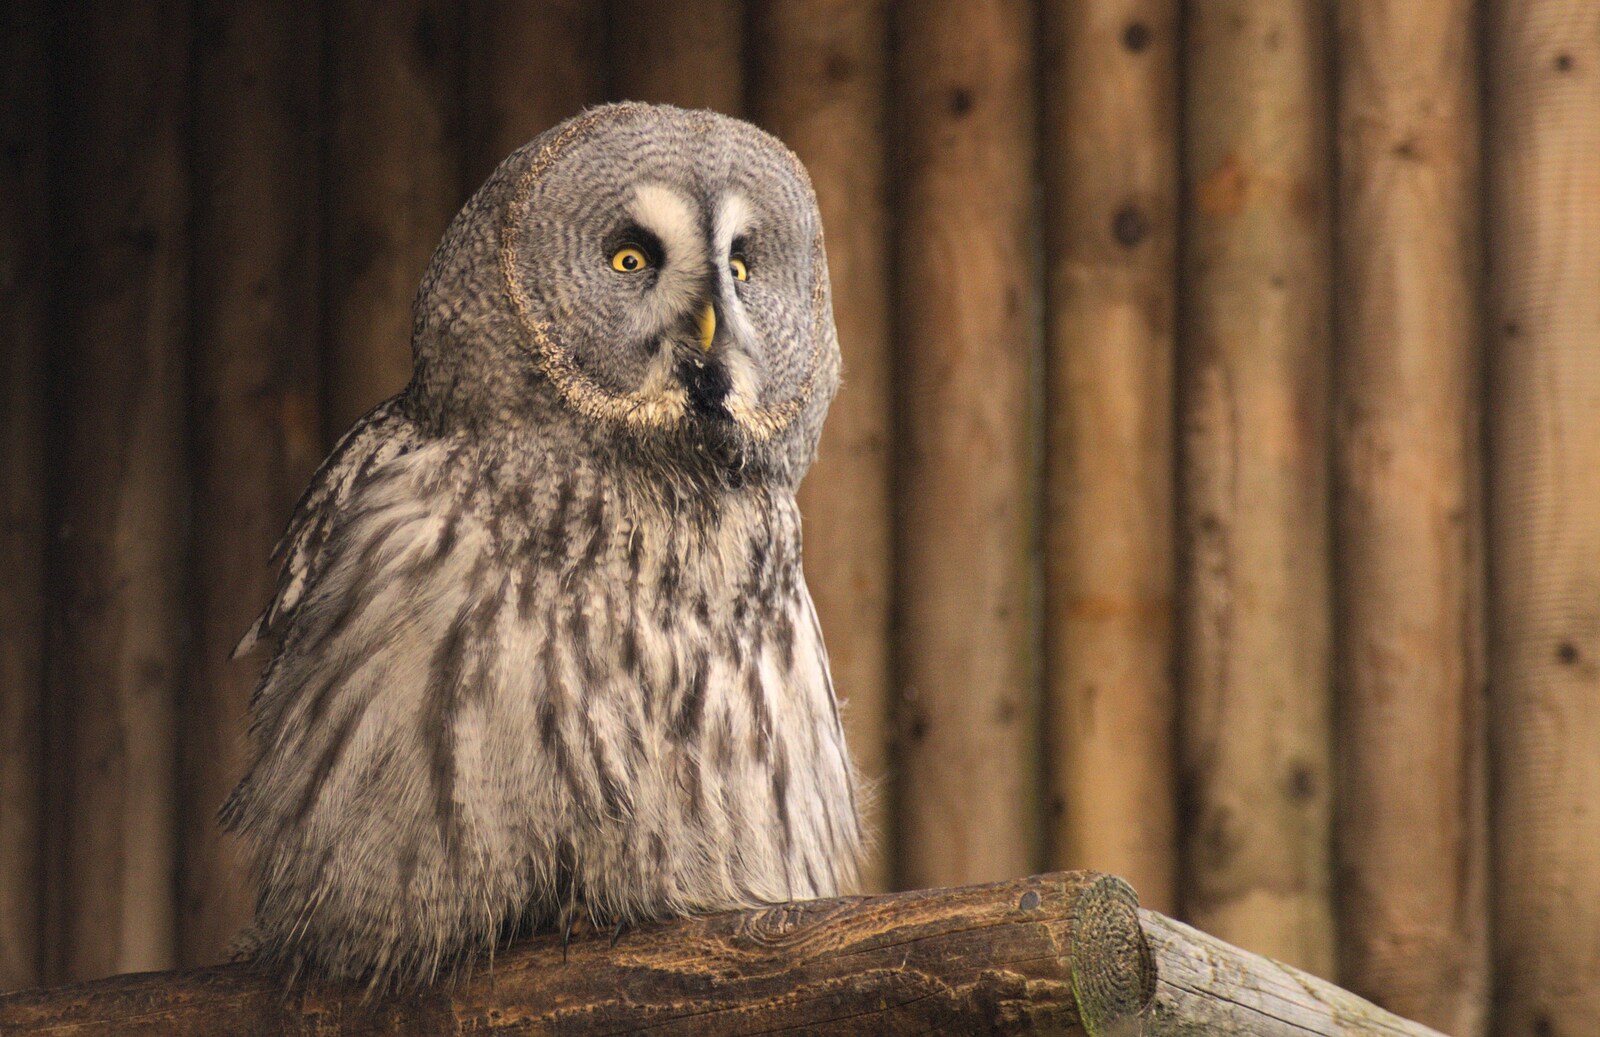 A big grey owl from Trips to Banham Zoo and Norwich, Norfolk - 2nd January 2012